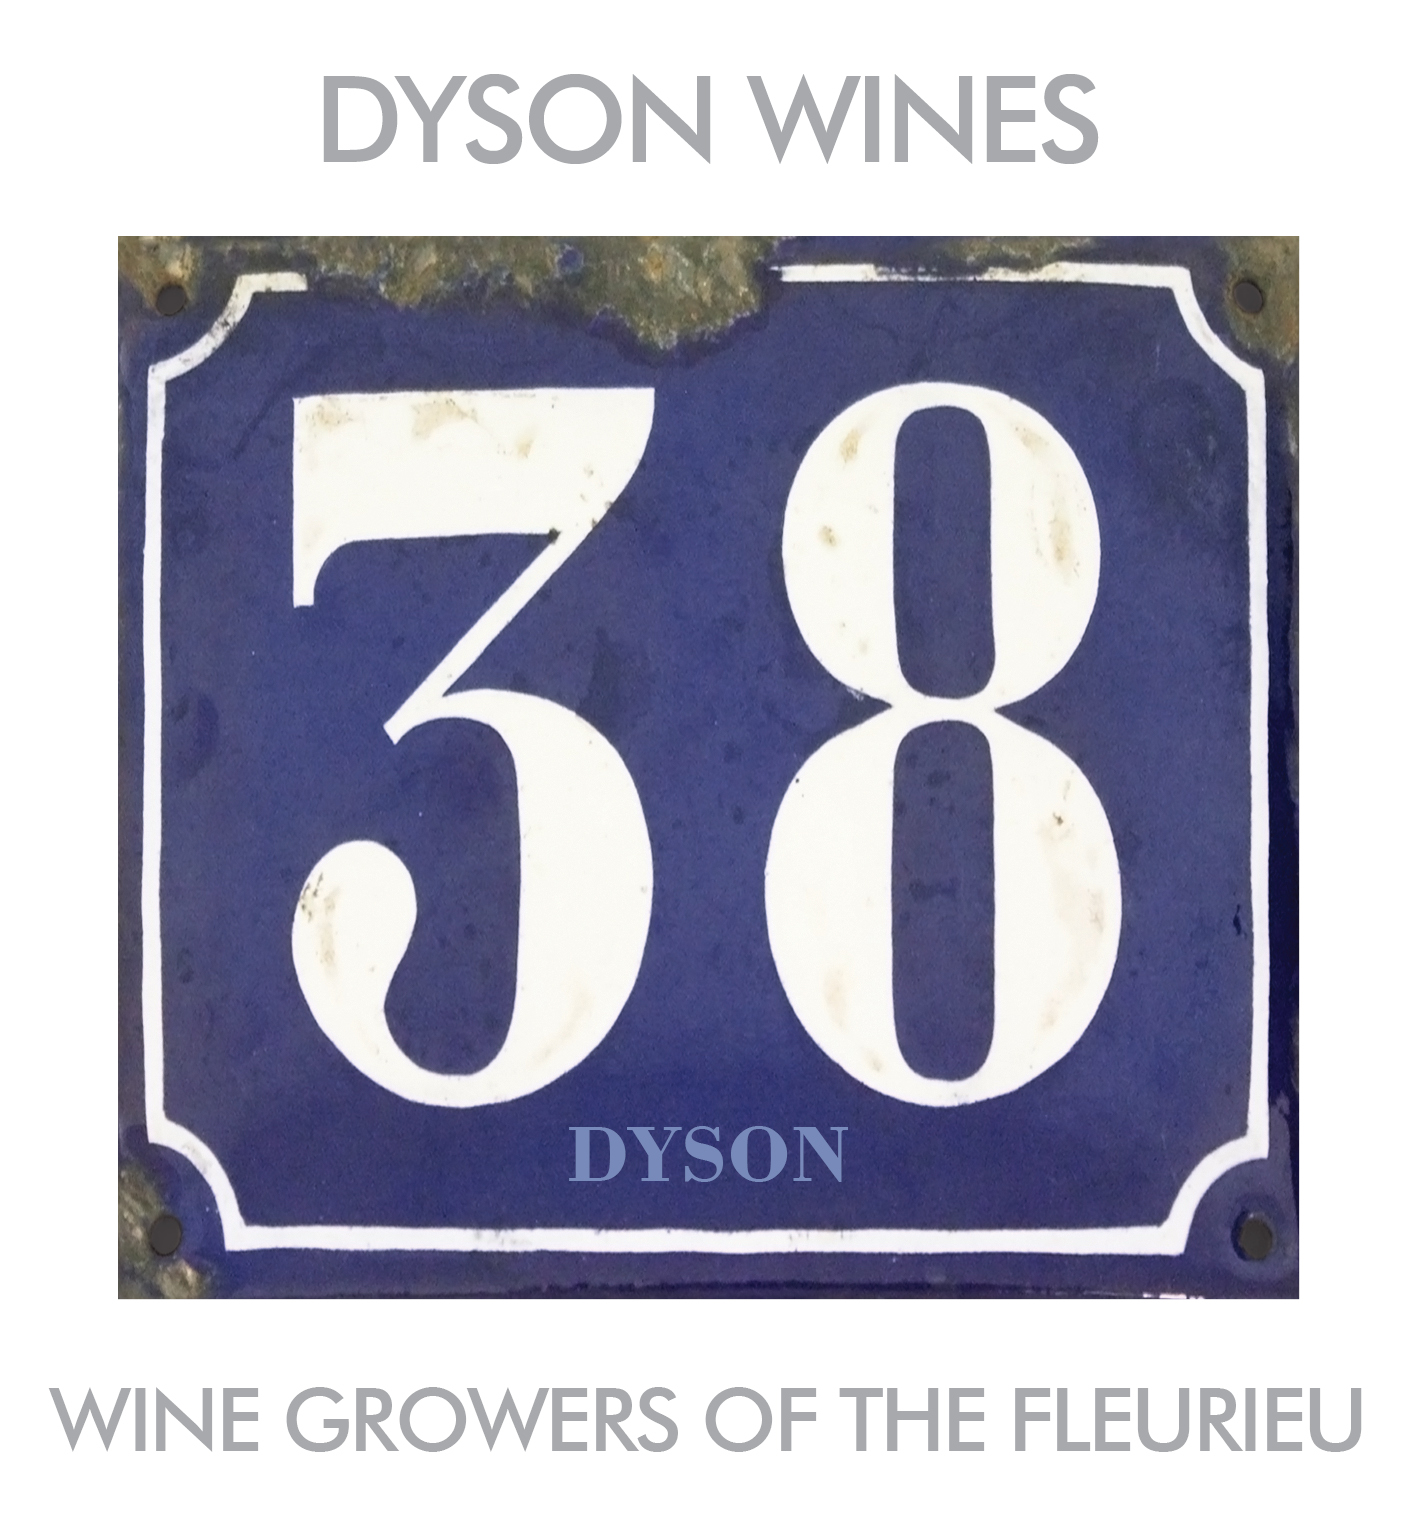 Dyson Wines - Attractions